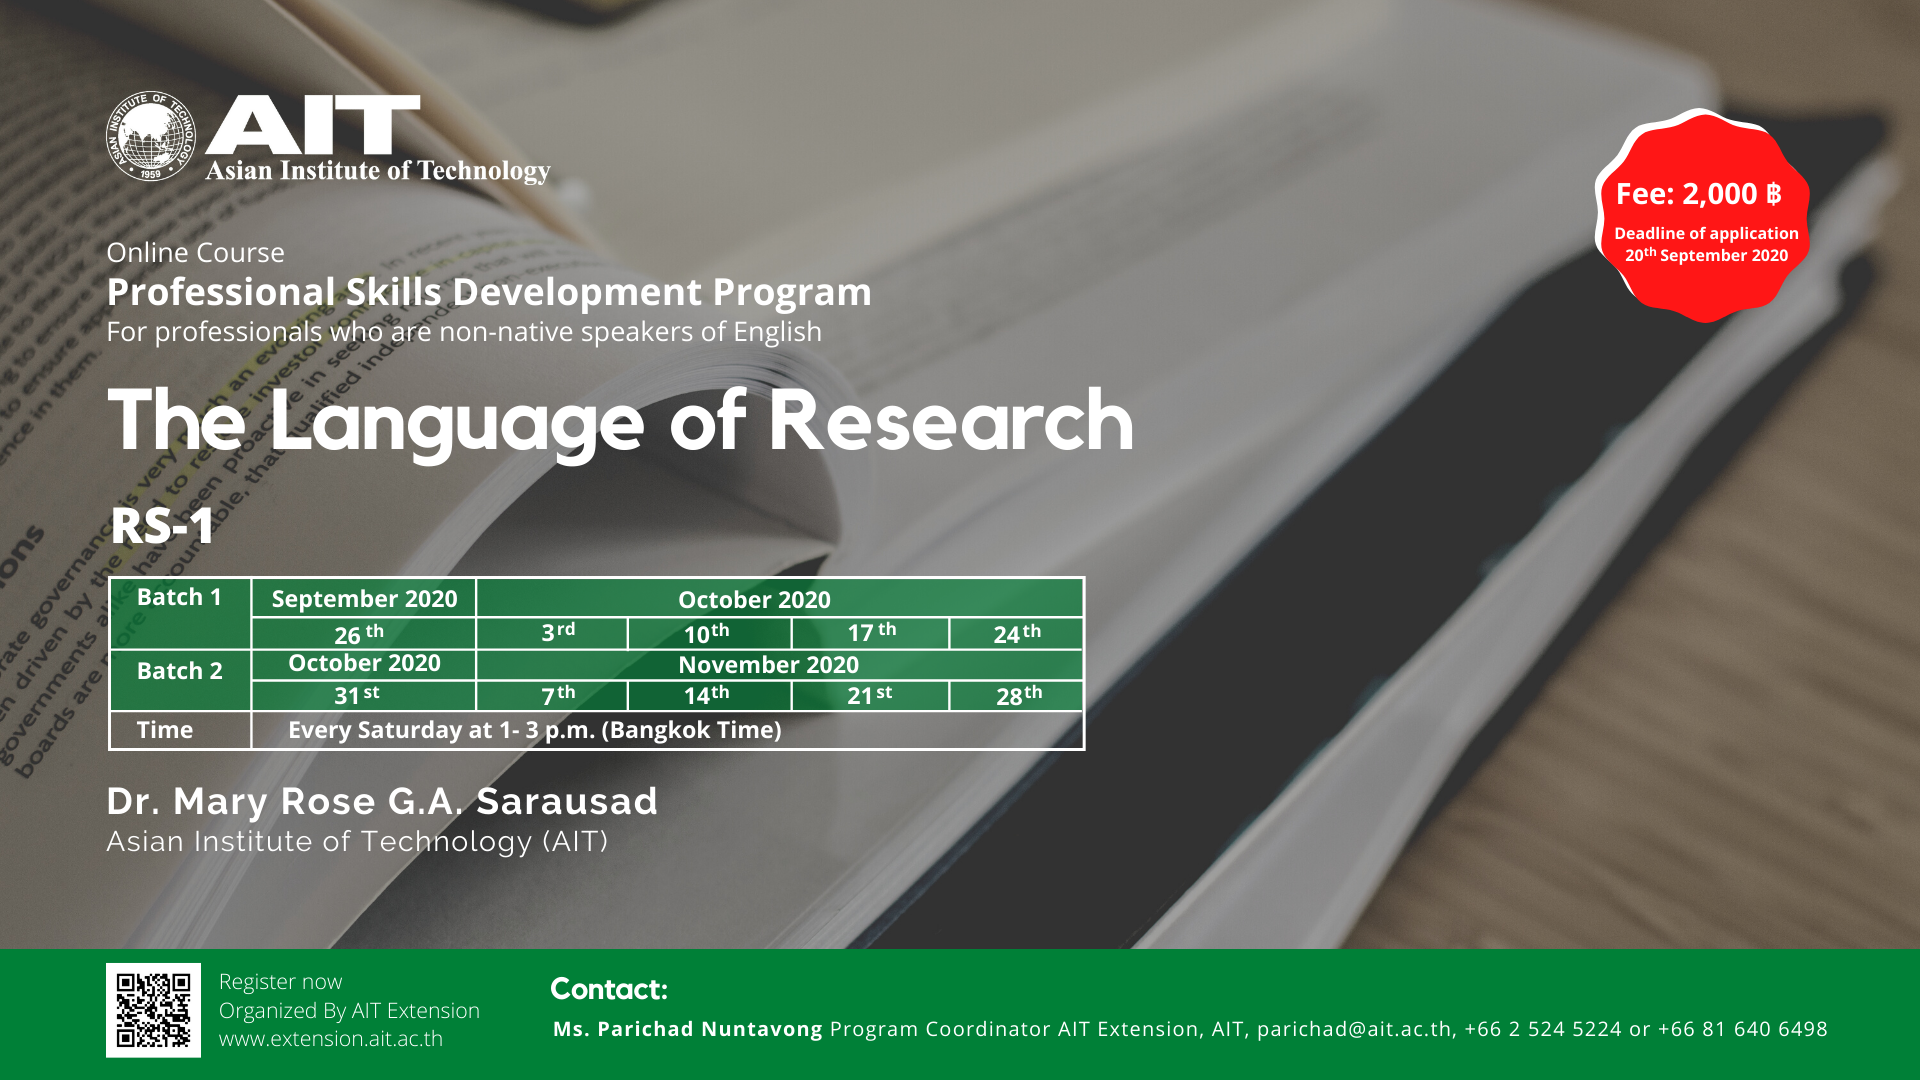 The Language of Research